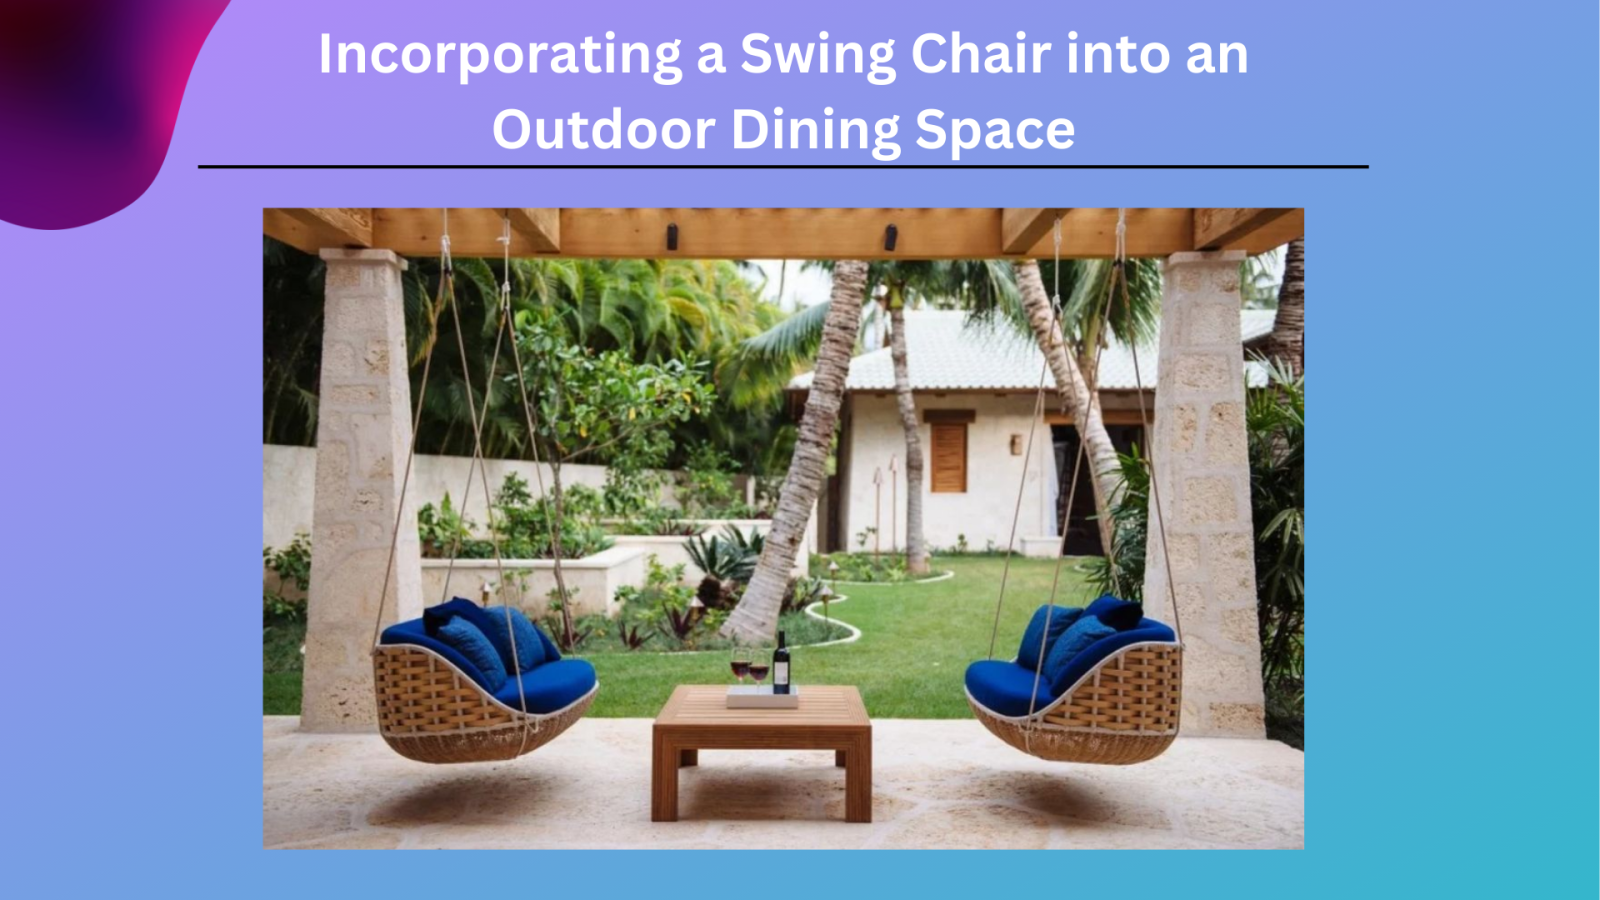 Swing Chair into an Outdoor Dining Space